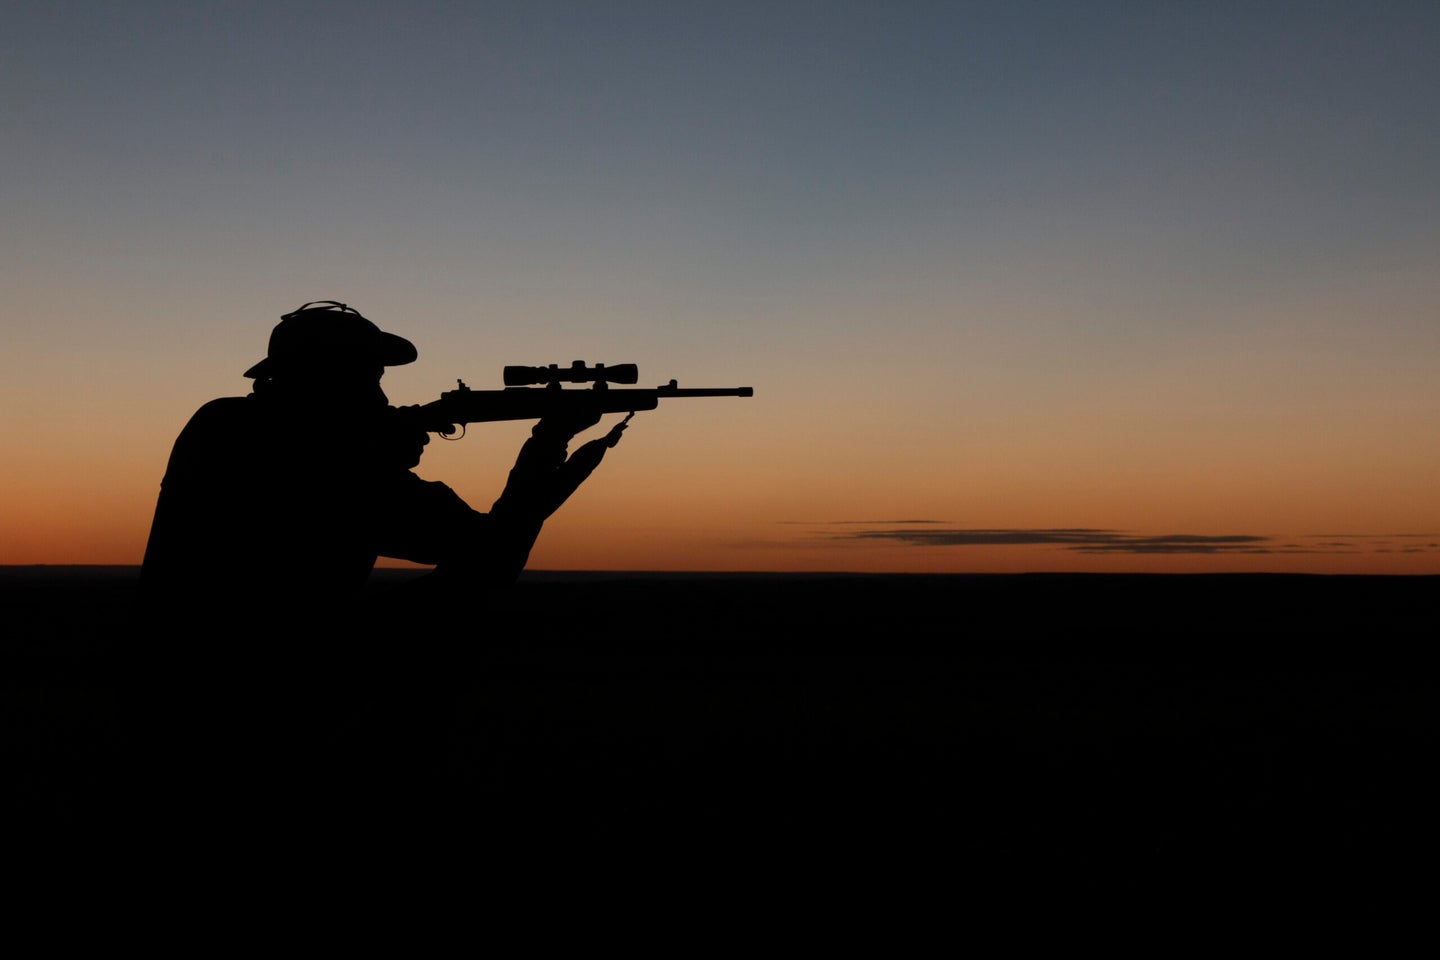 Silhouette of a man aiming a rifle against the sunset.